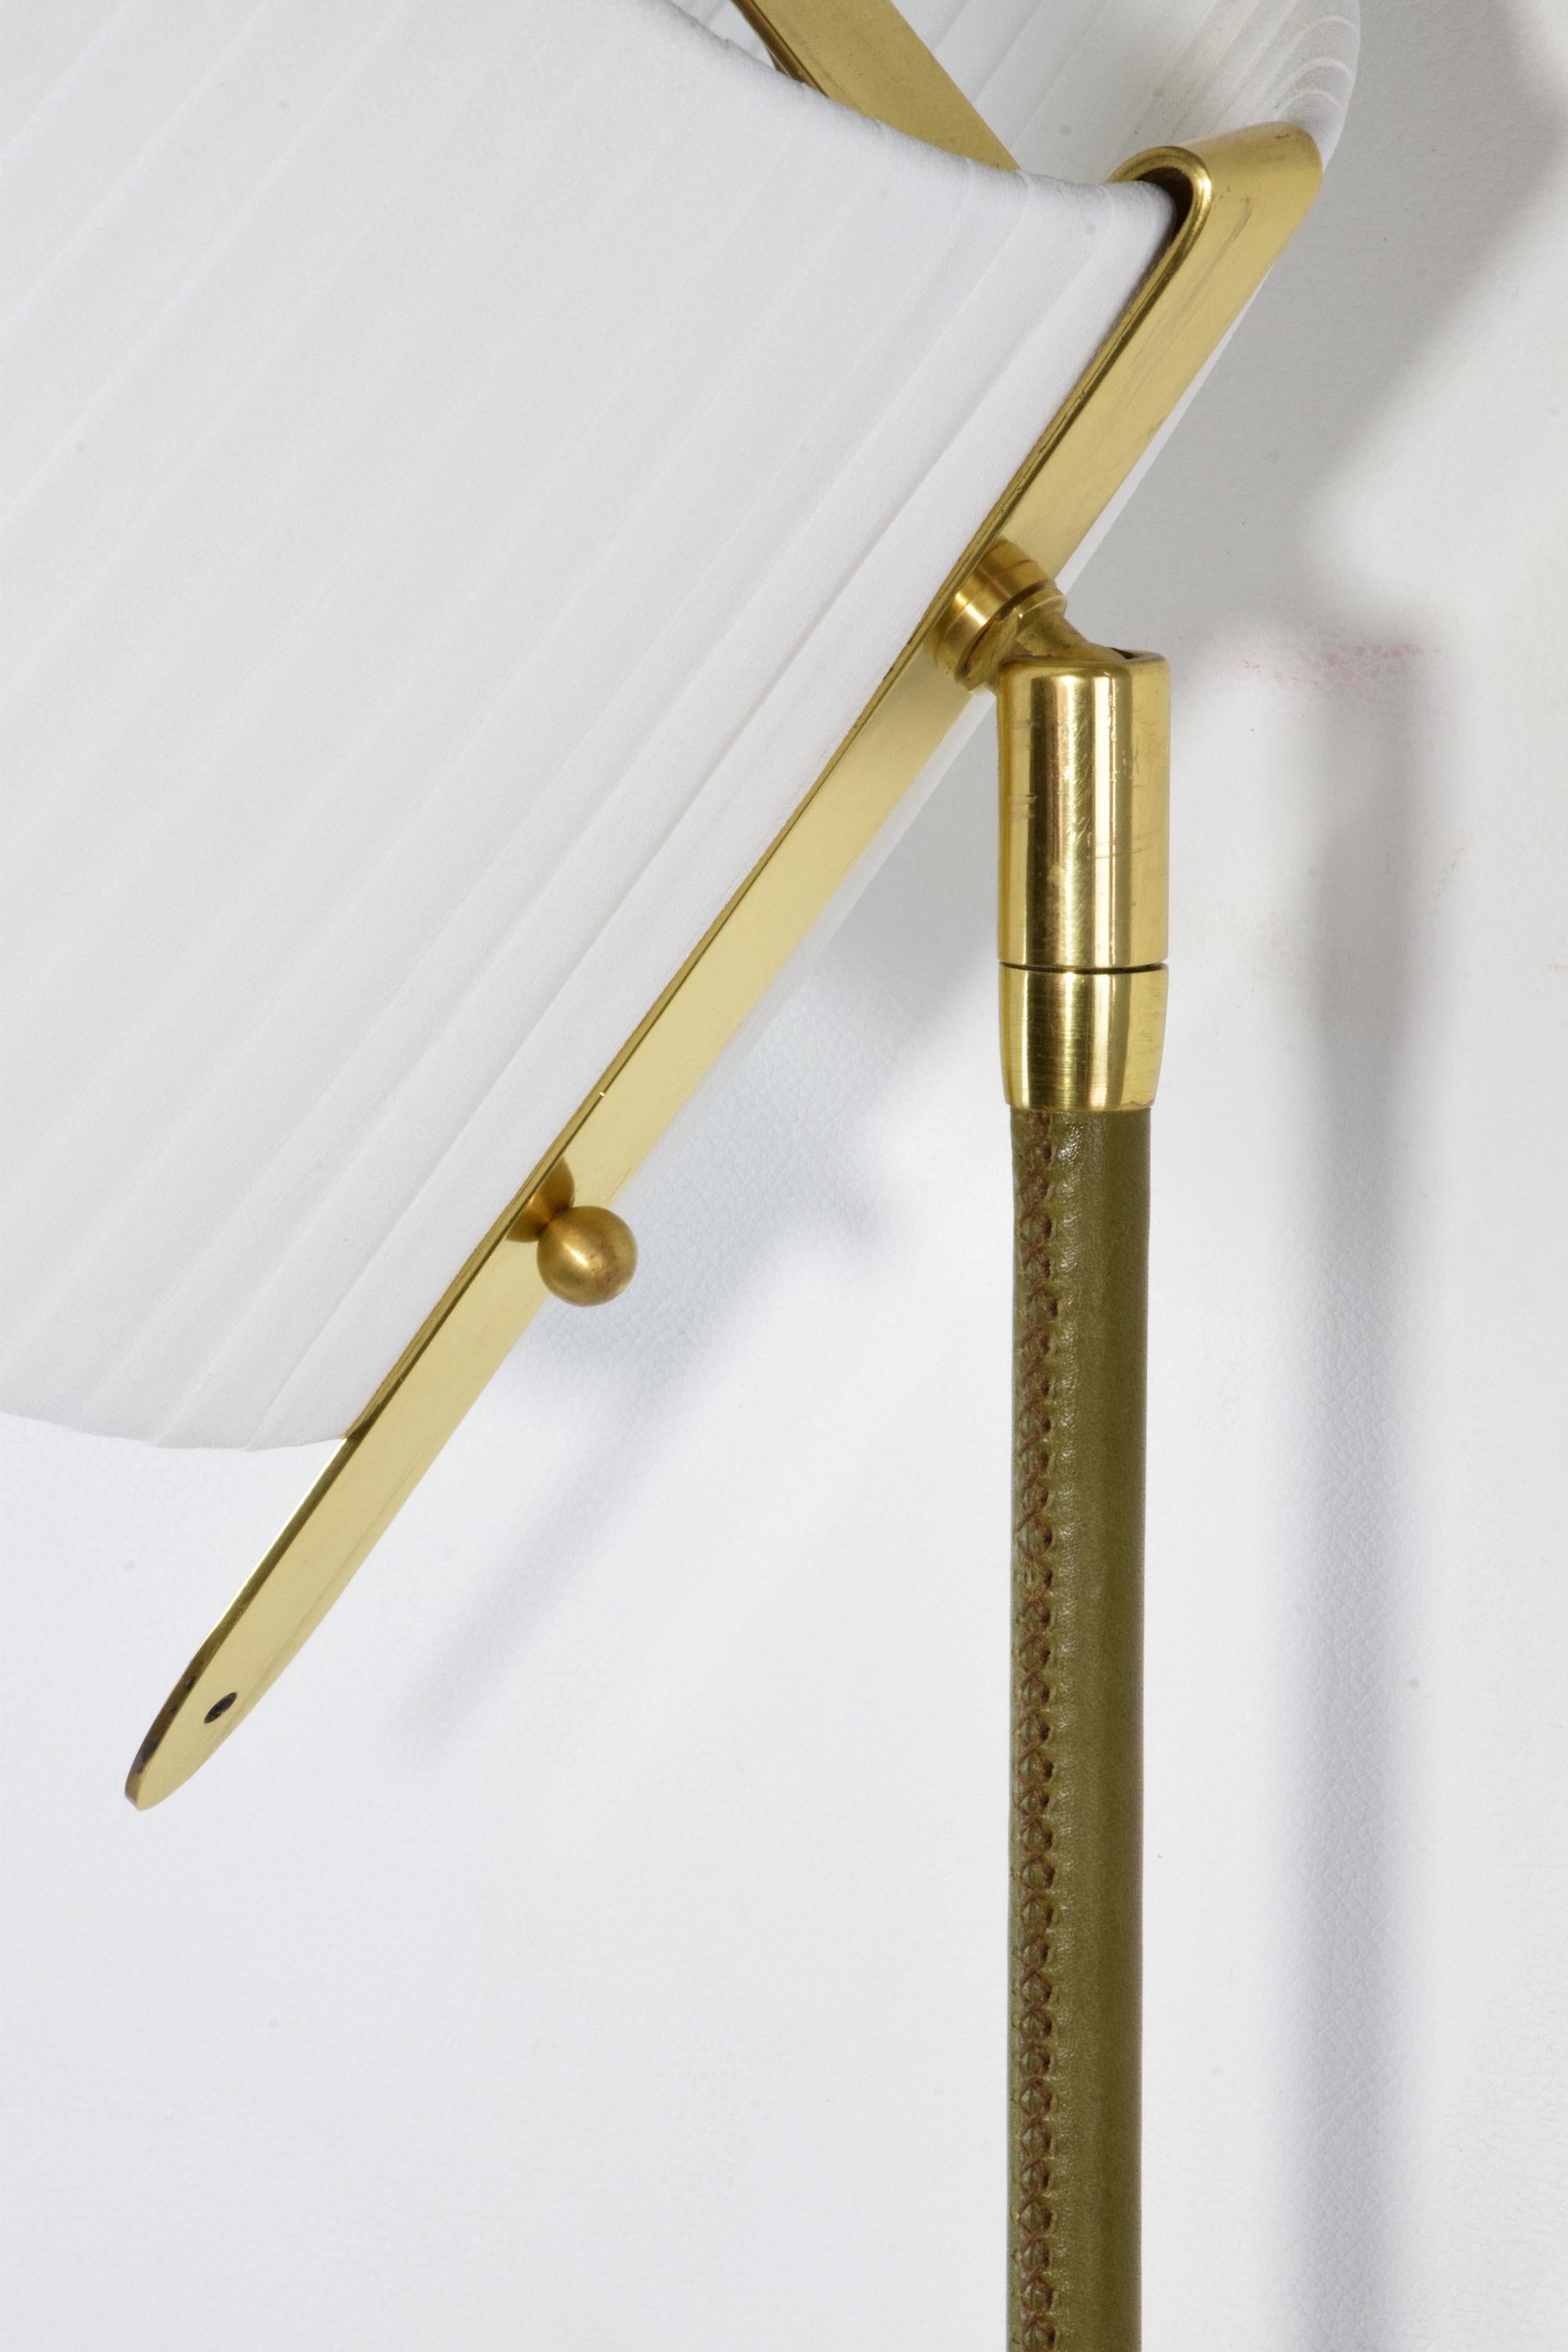 Ancora-W1 Contemporary Articulating Brass Wall Light, Flow Collection im Angebot 3